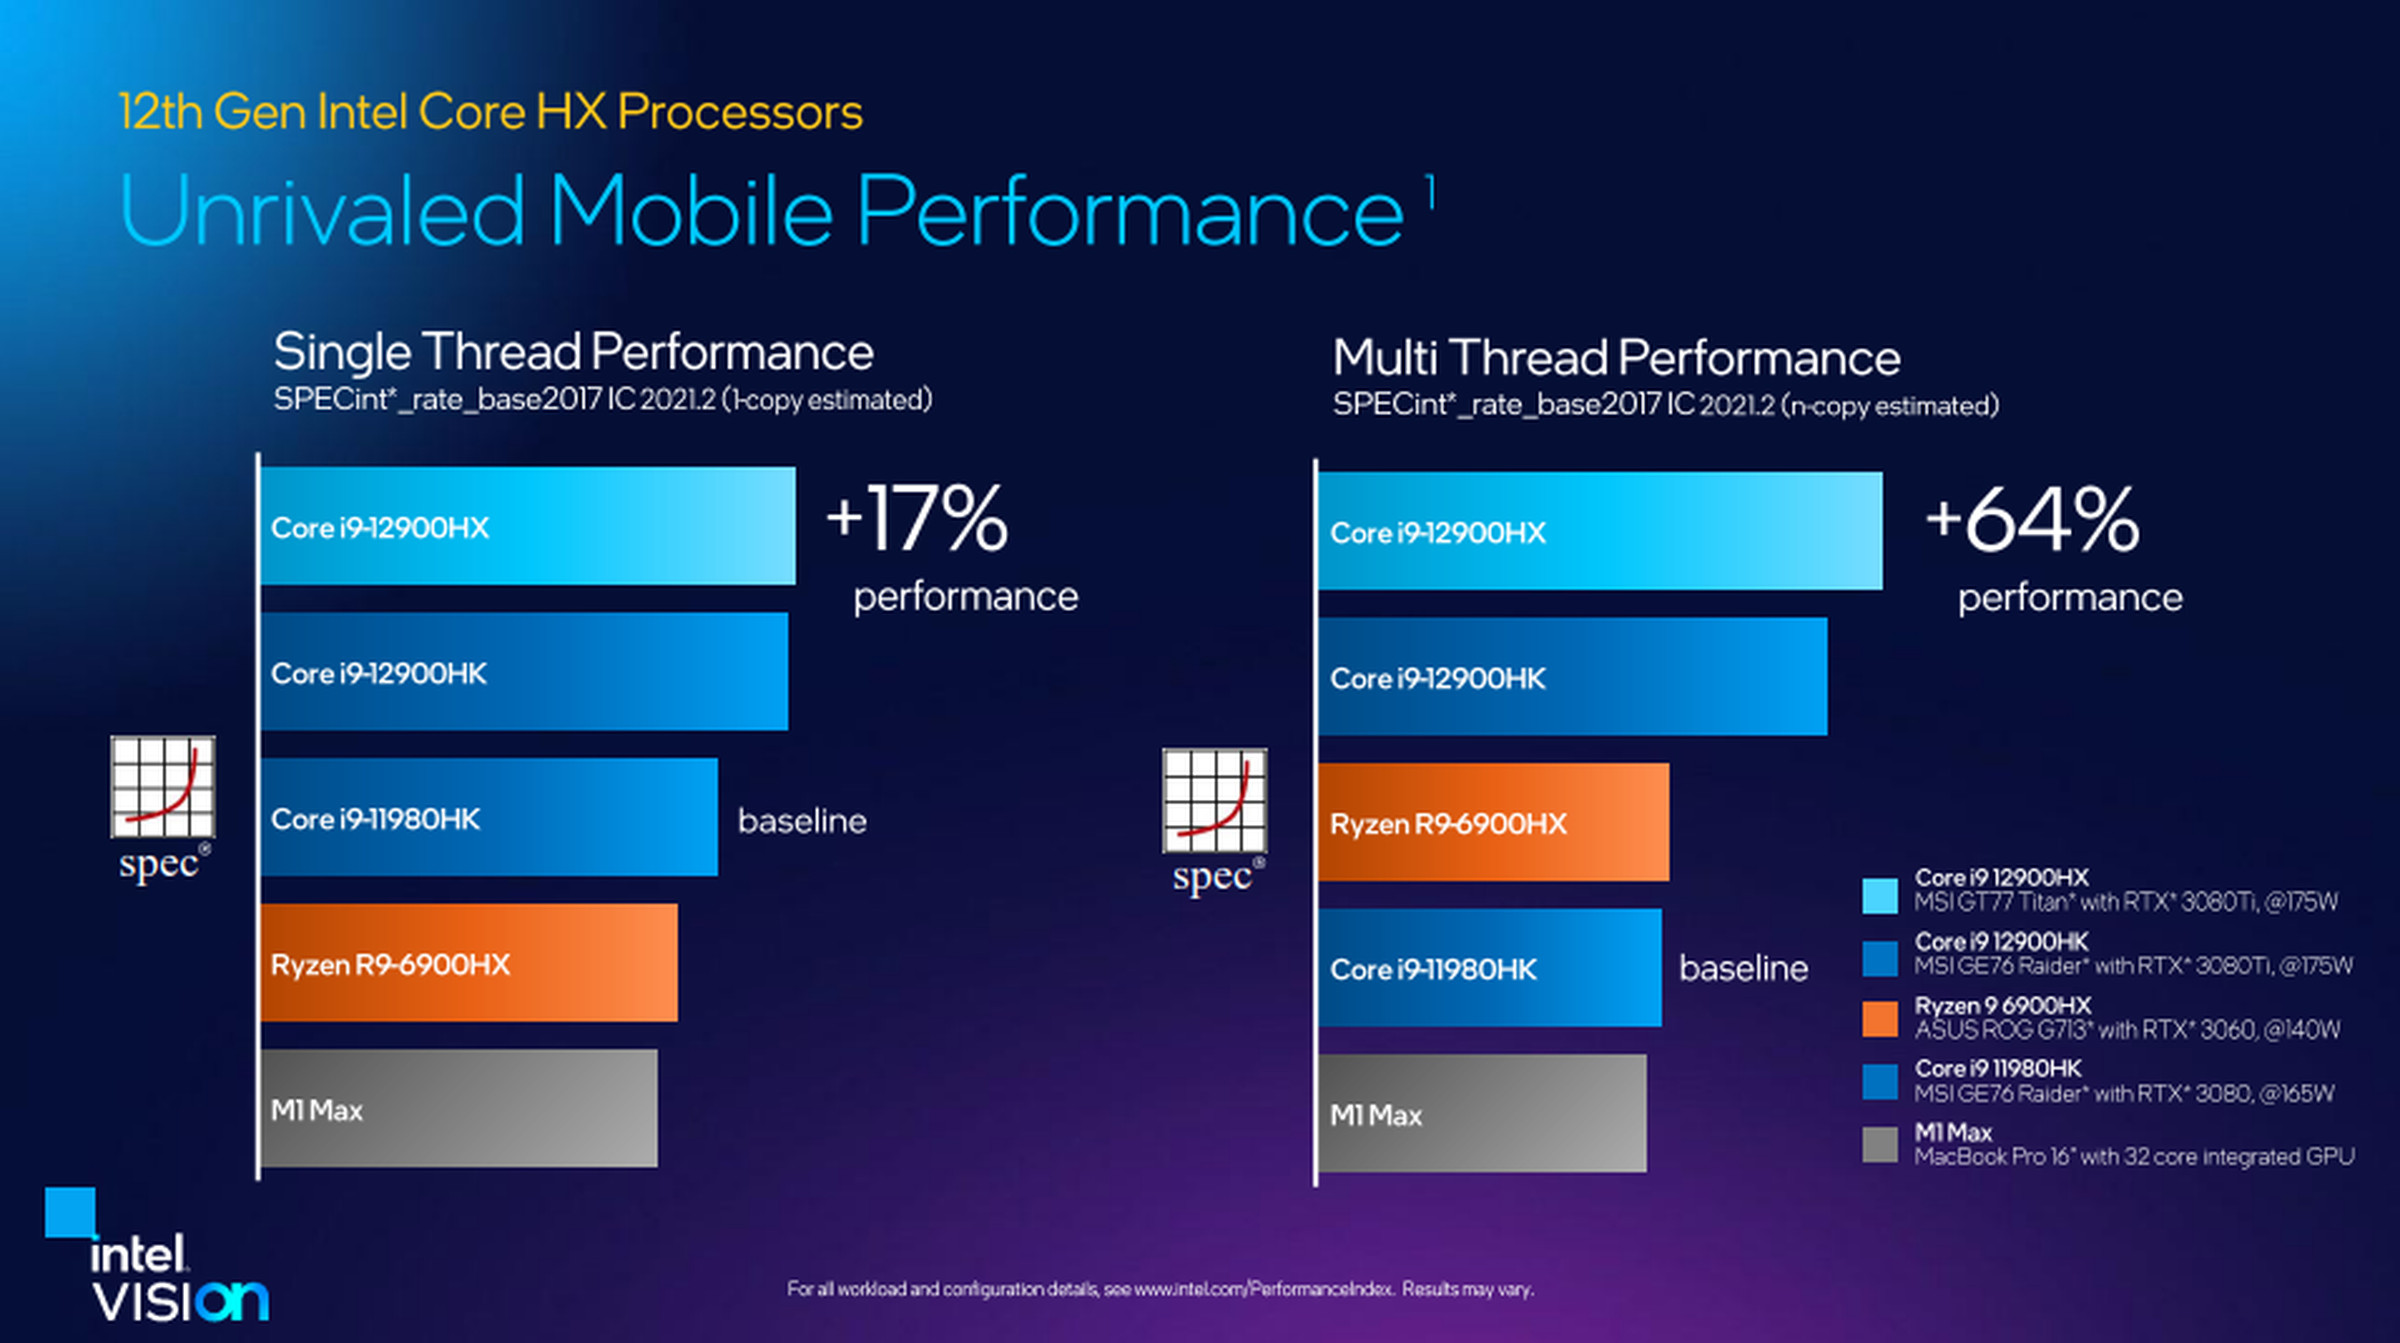 A chart titled “12th Gen Intel Core HX Processors Unrivaled Mobile Performance.” The Single Thread Performance chart shows the Core i9-12900HK beating the baseline 11th-Gen Core i9 by 112 percent. The Multi Thread Performance chart shows the Core i9 beating the 11th-Gen Core i9 by 64 percent.